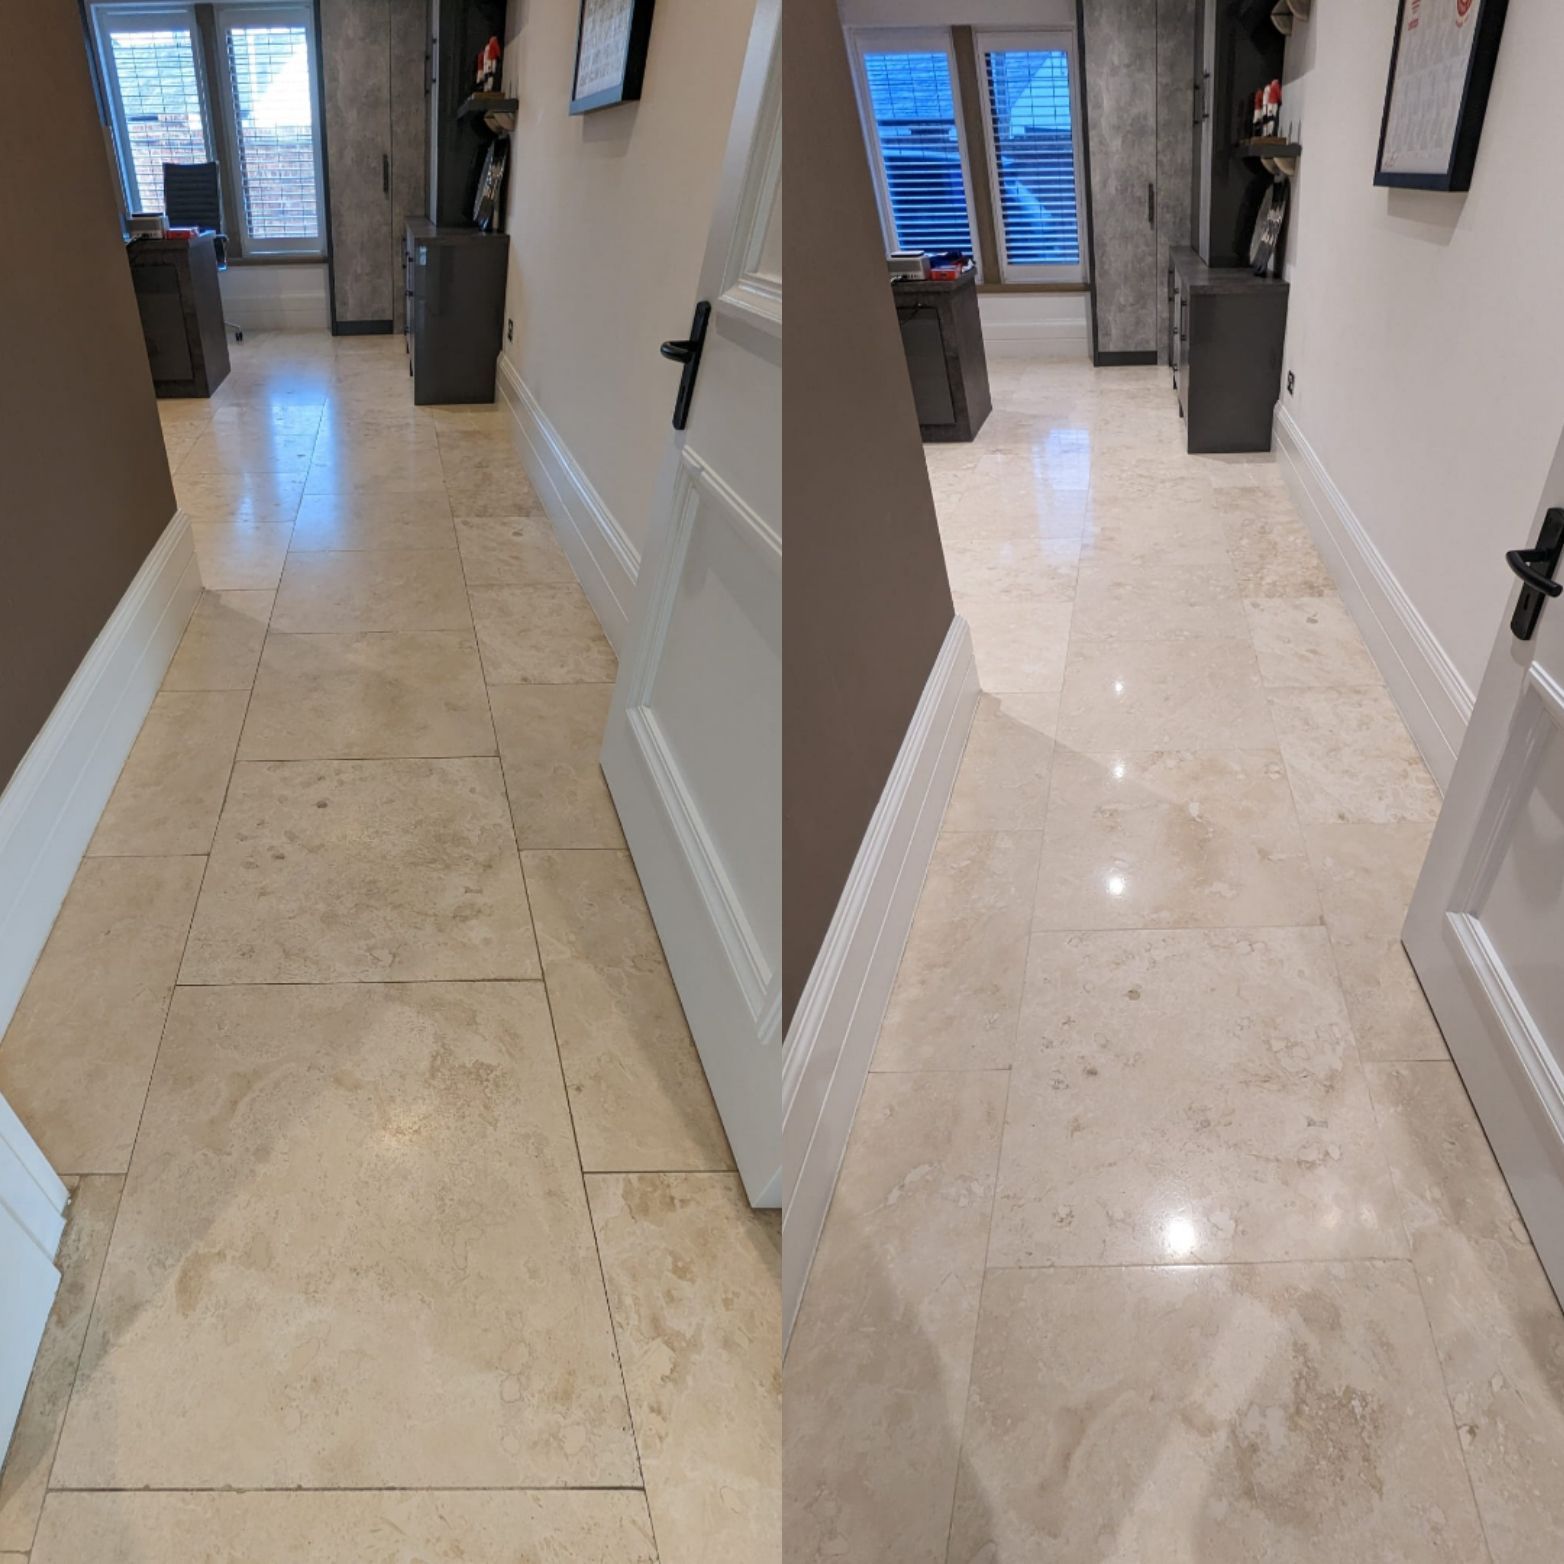 REVIVING ELEGANCE: MARBLE TILE RESTORATION including deep cleaning, milling and polishing IN MANCHESTER, GREATER MANCHESTER